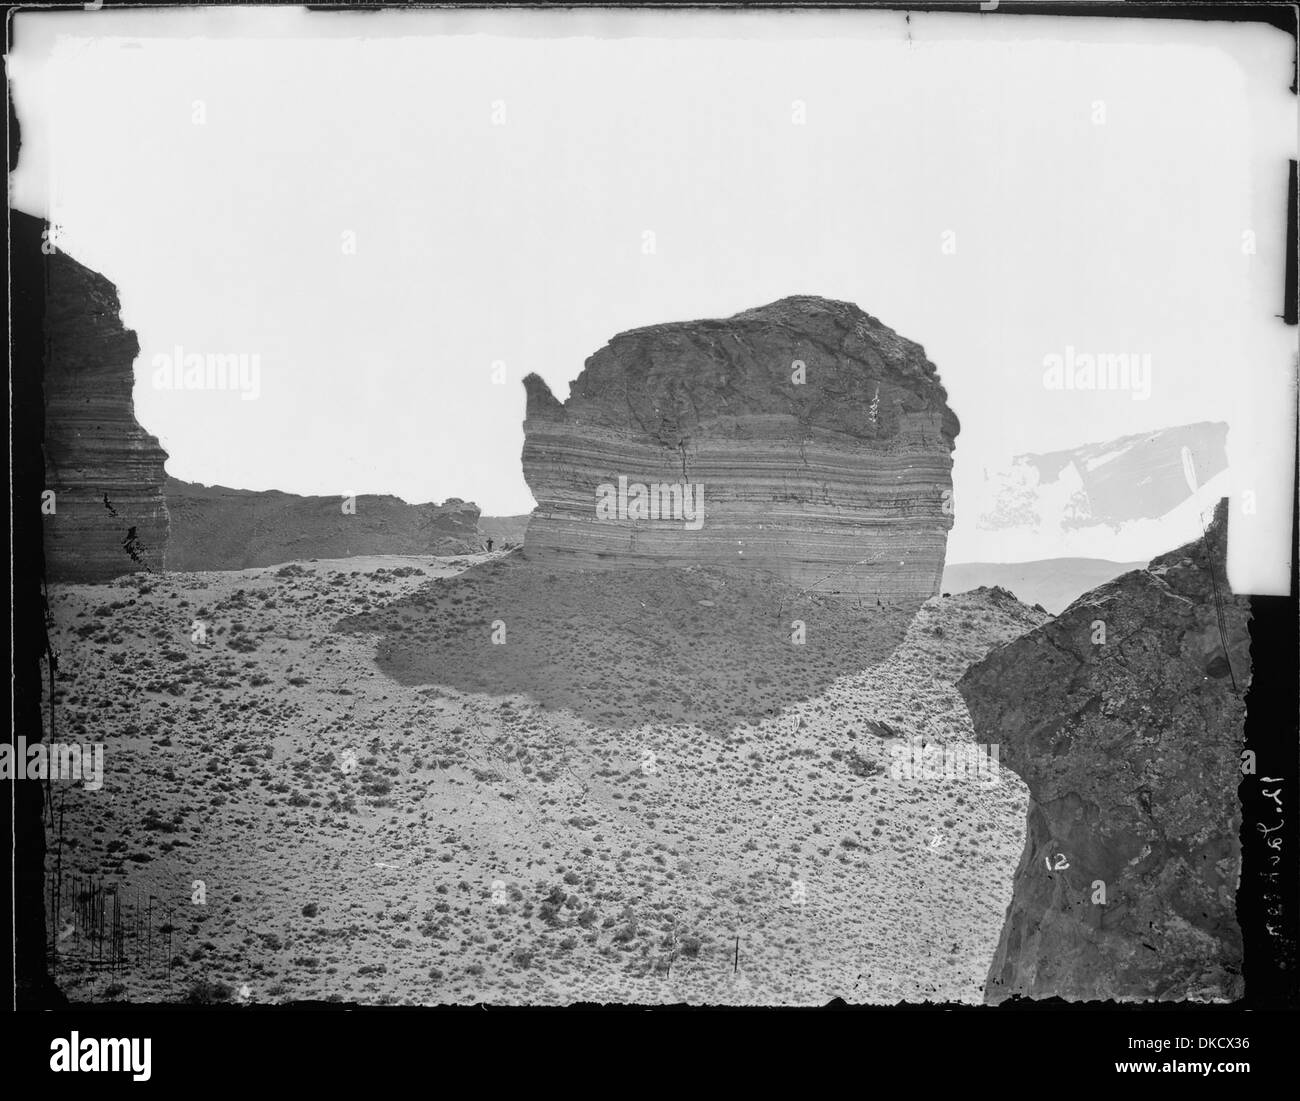 Teapot Rock, near Green River Station. Sweetwater County, Wyoming. Small figure of man at foot of spout gives an... 516618 Stock Photo